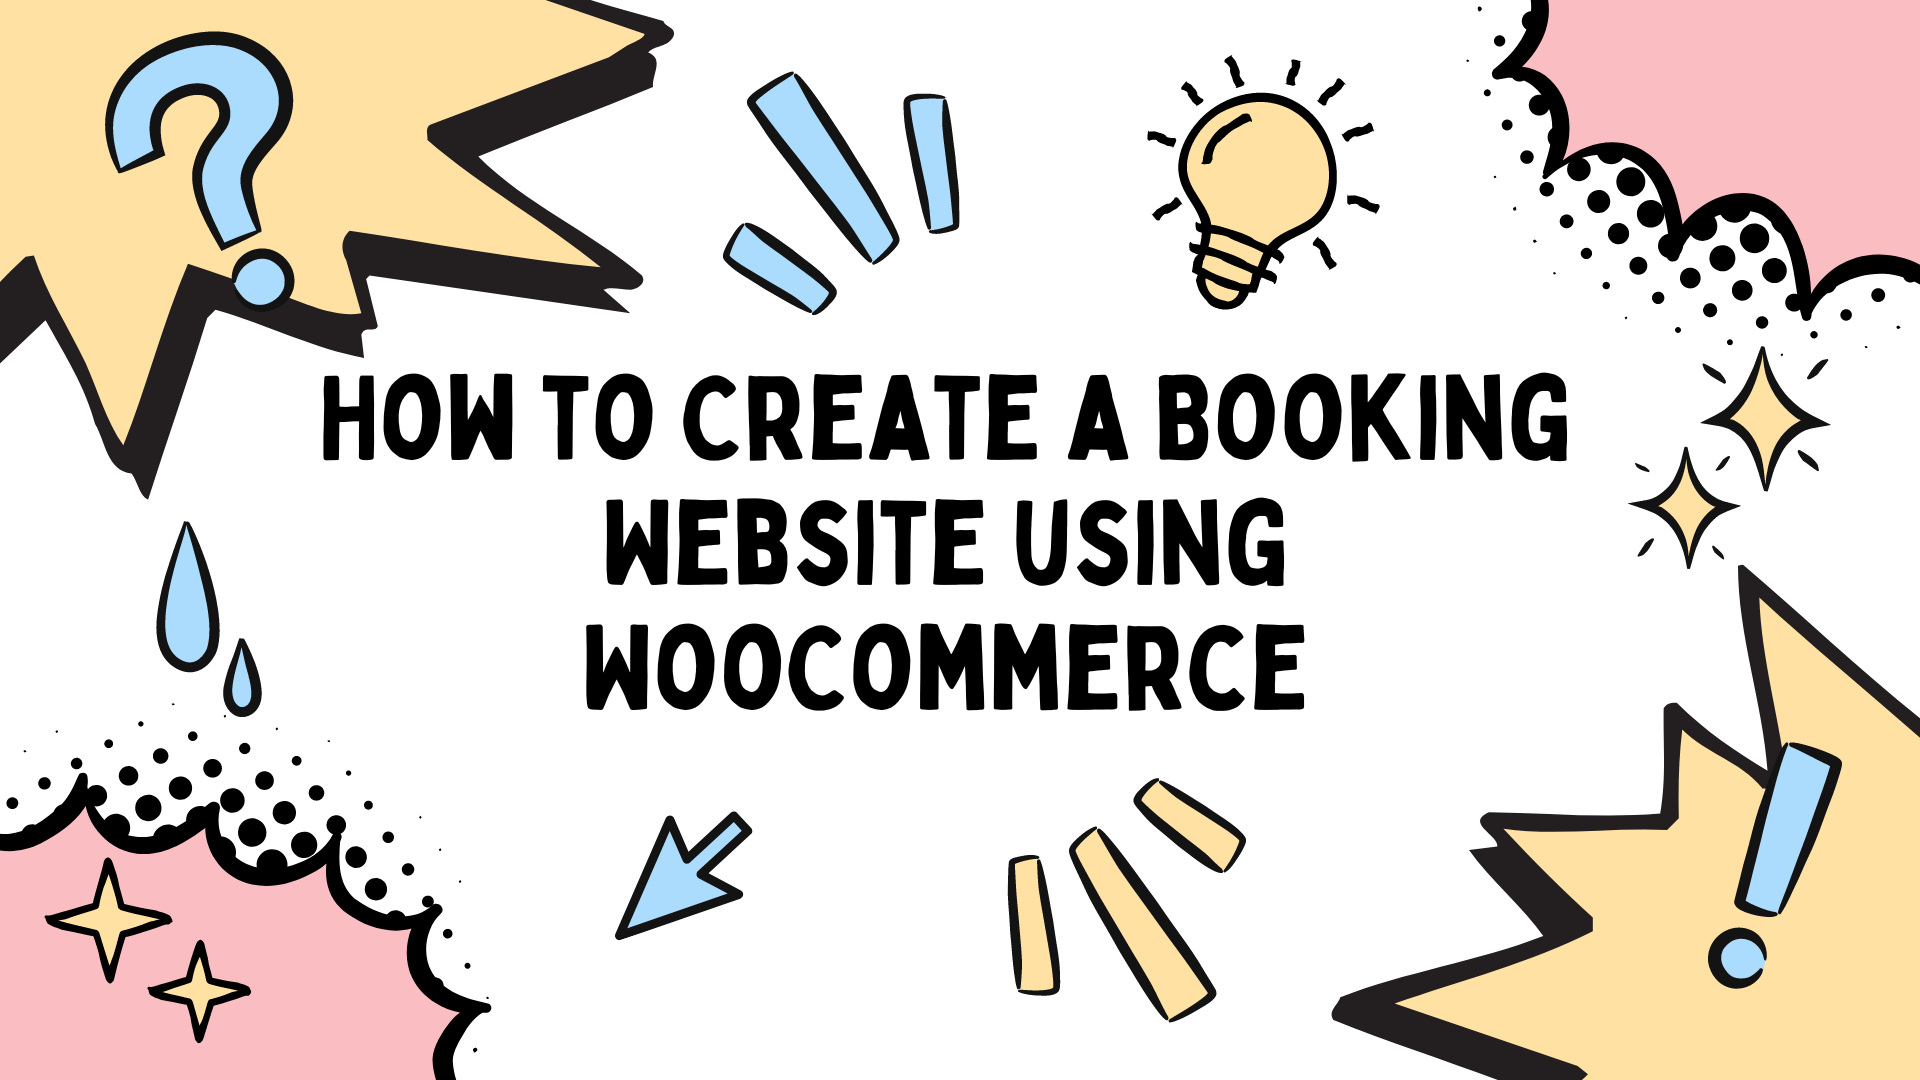 How to Create a Booking Website using WooCommerce